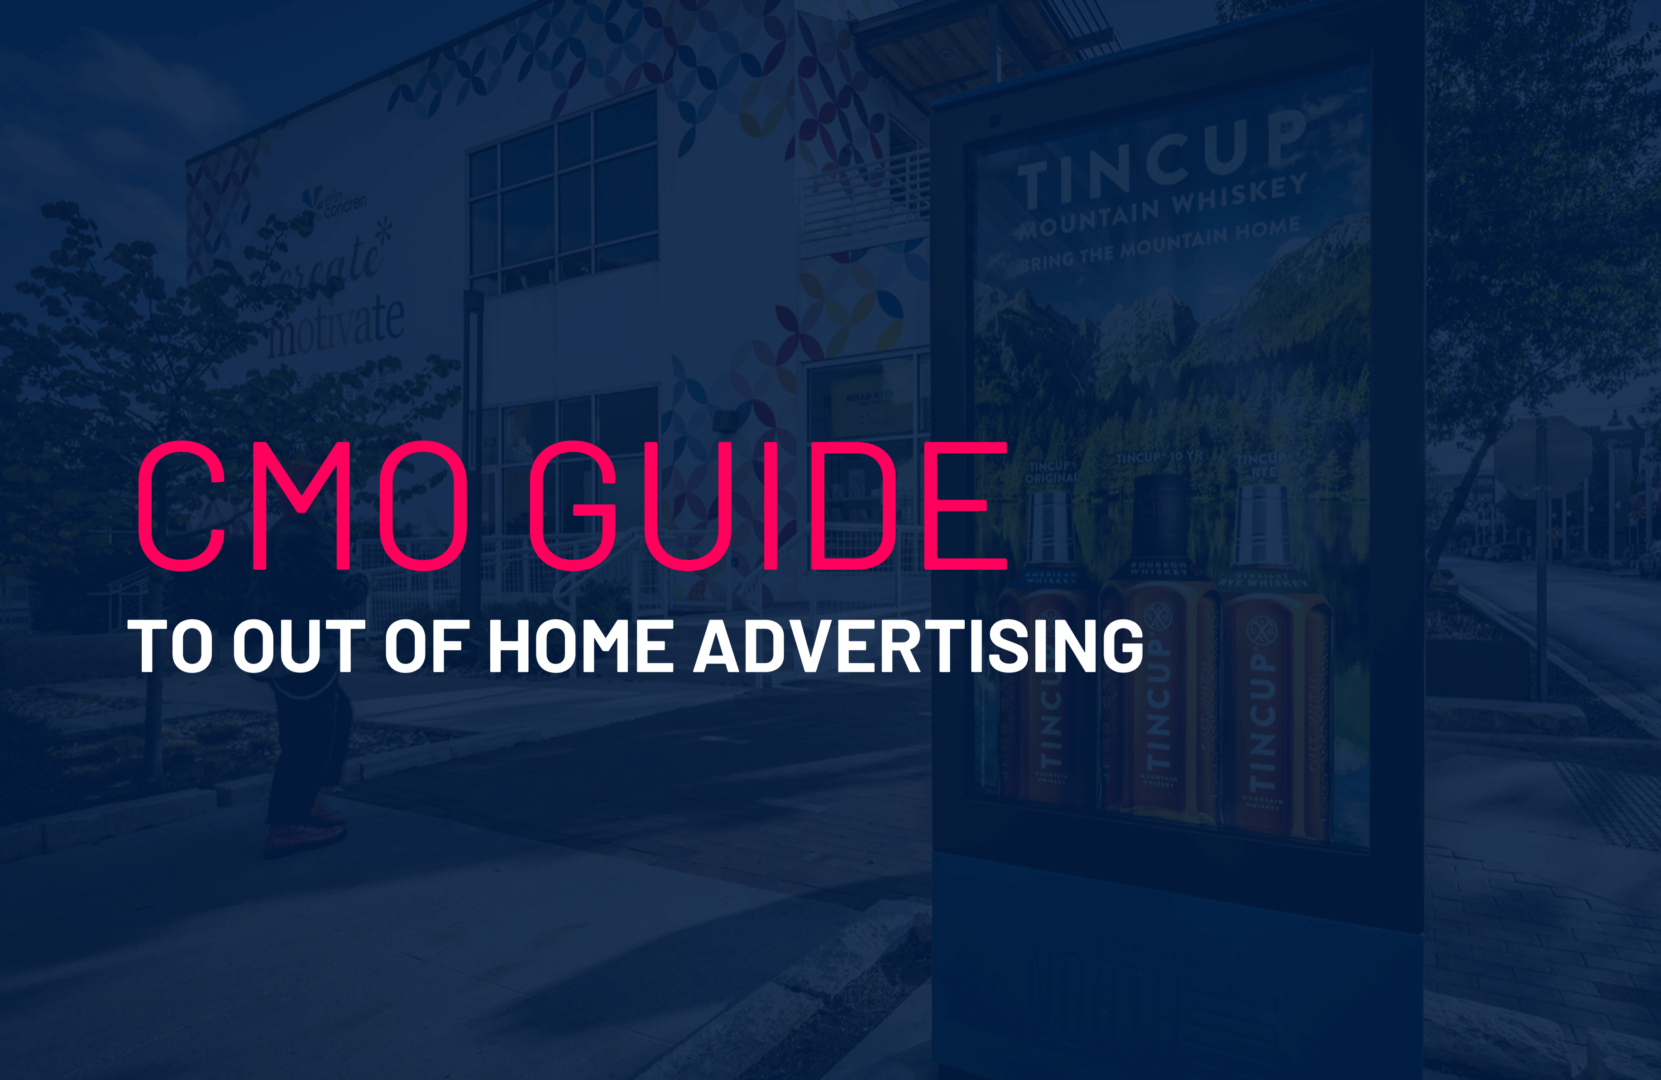 CMO Guide Image new